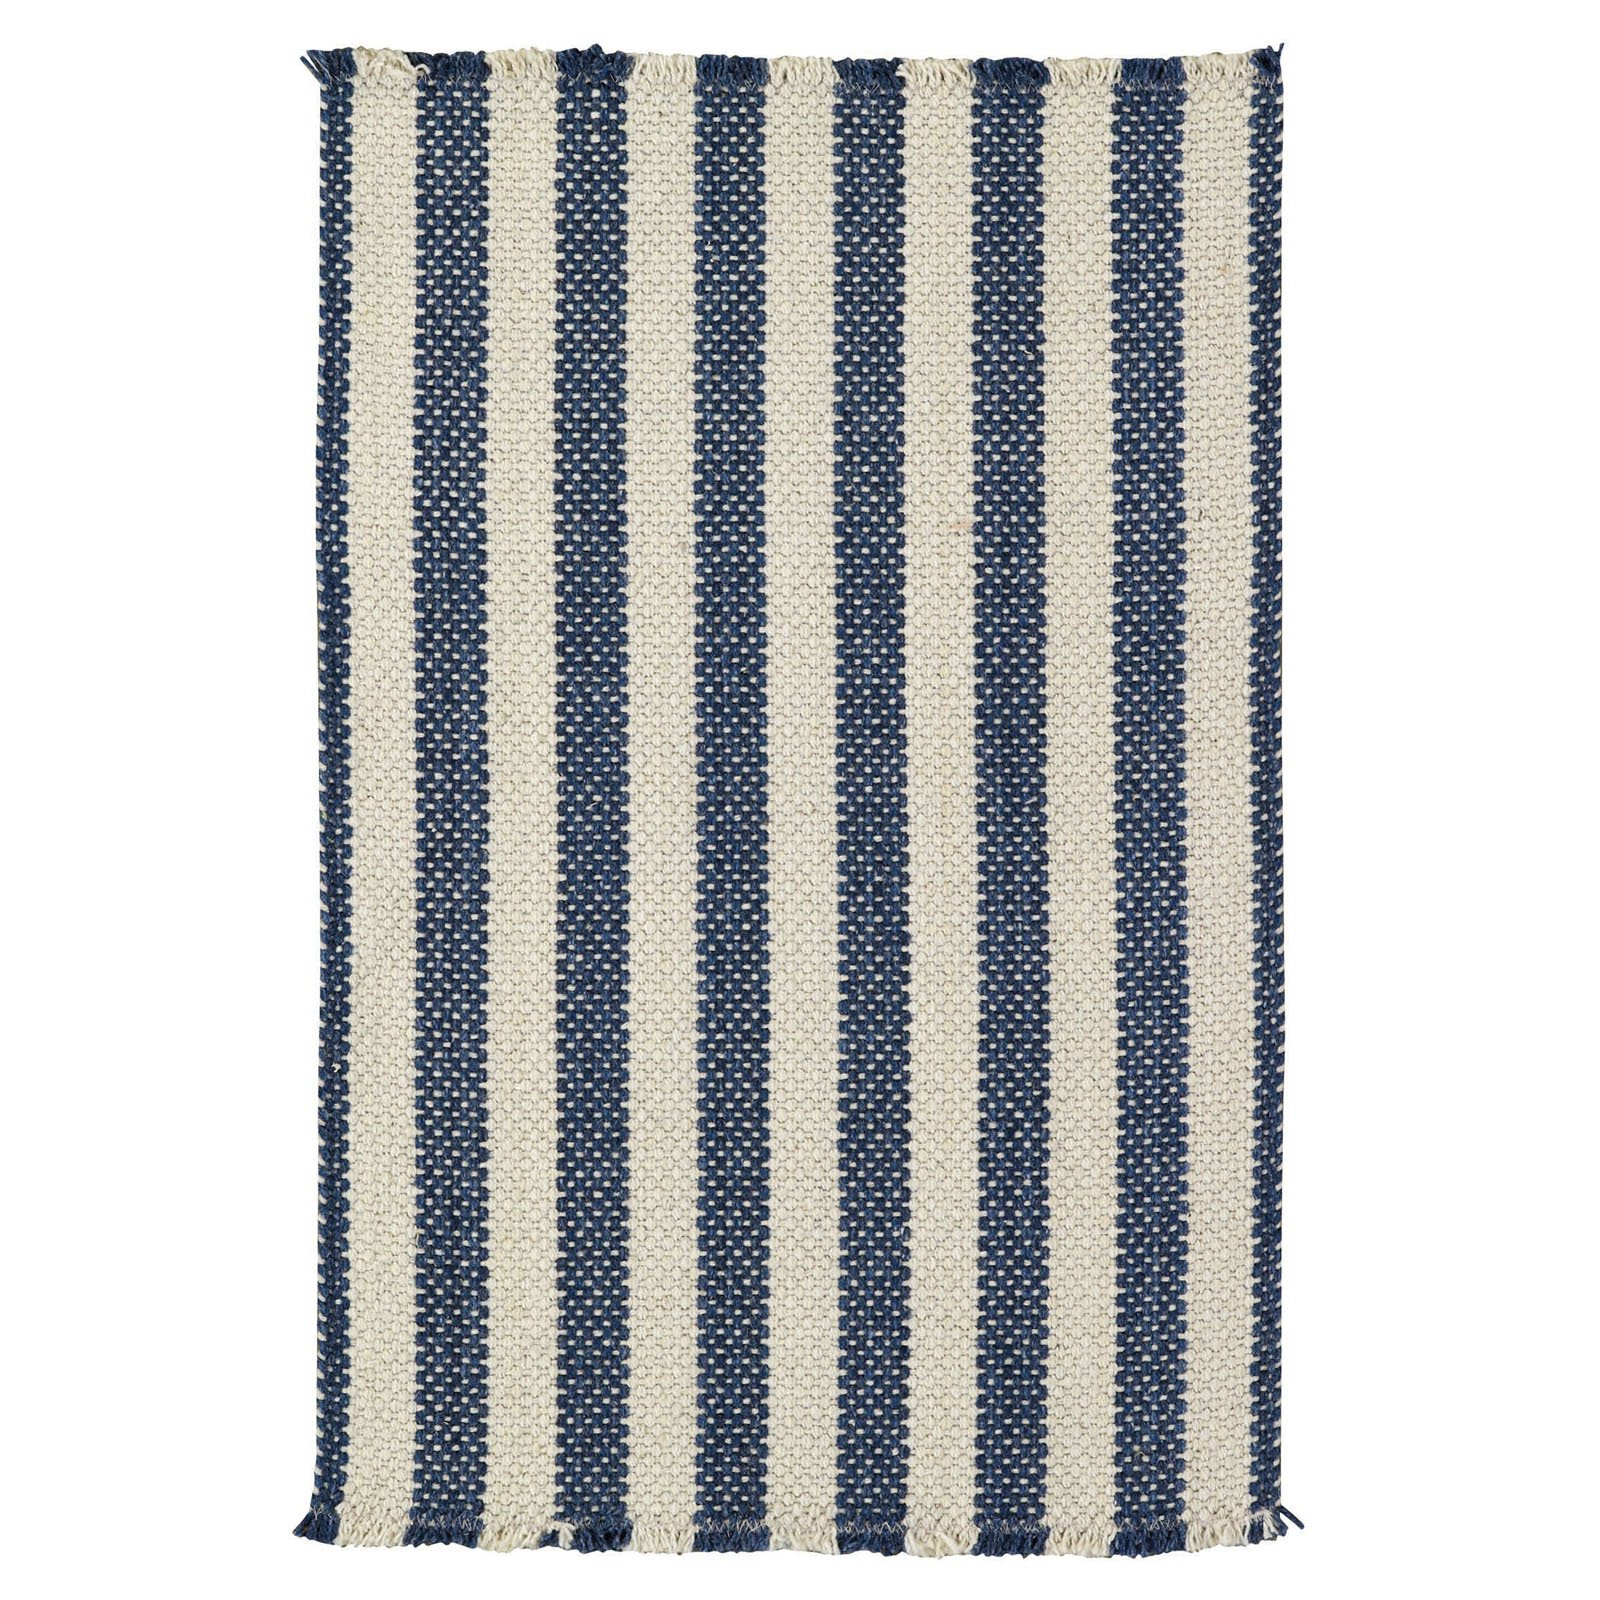 Capel Rugs - Nags Head Vertical Stripe Rectangle Flat Woven Rugs - image 2 of 3